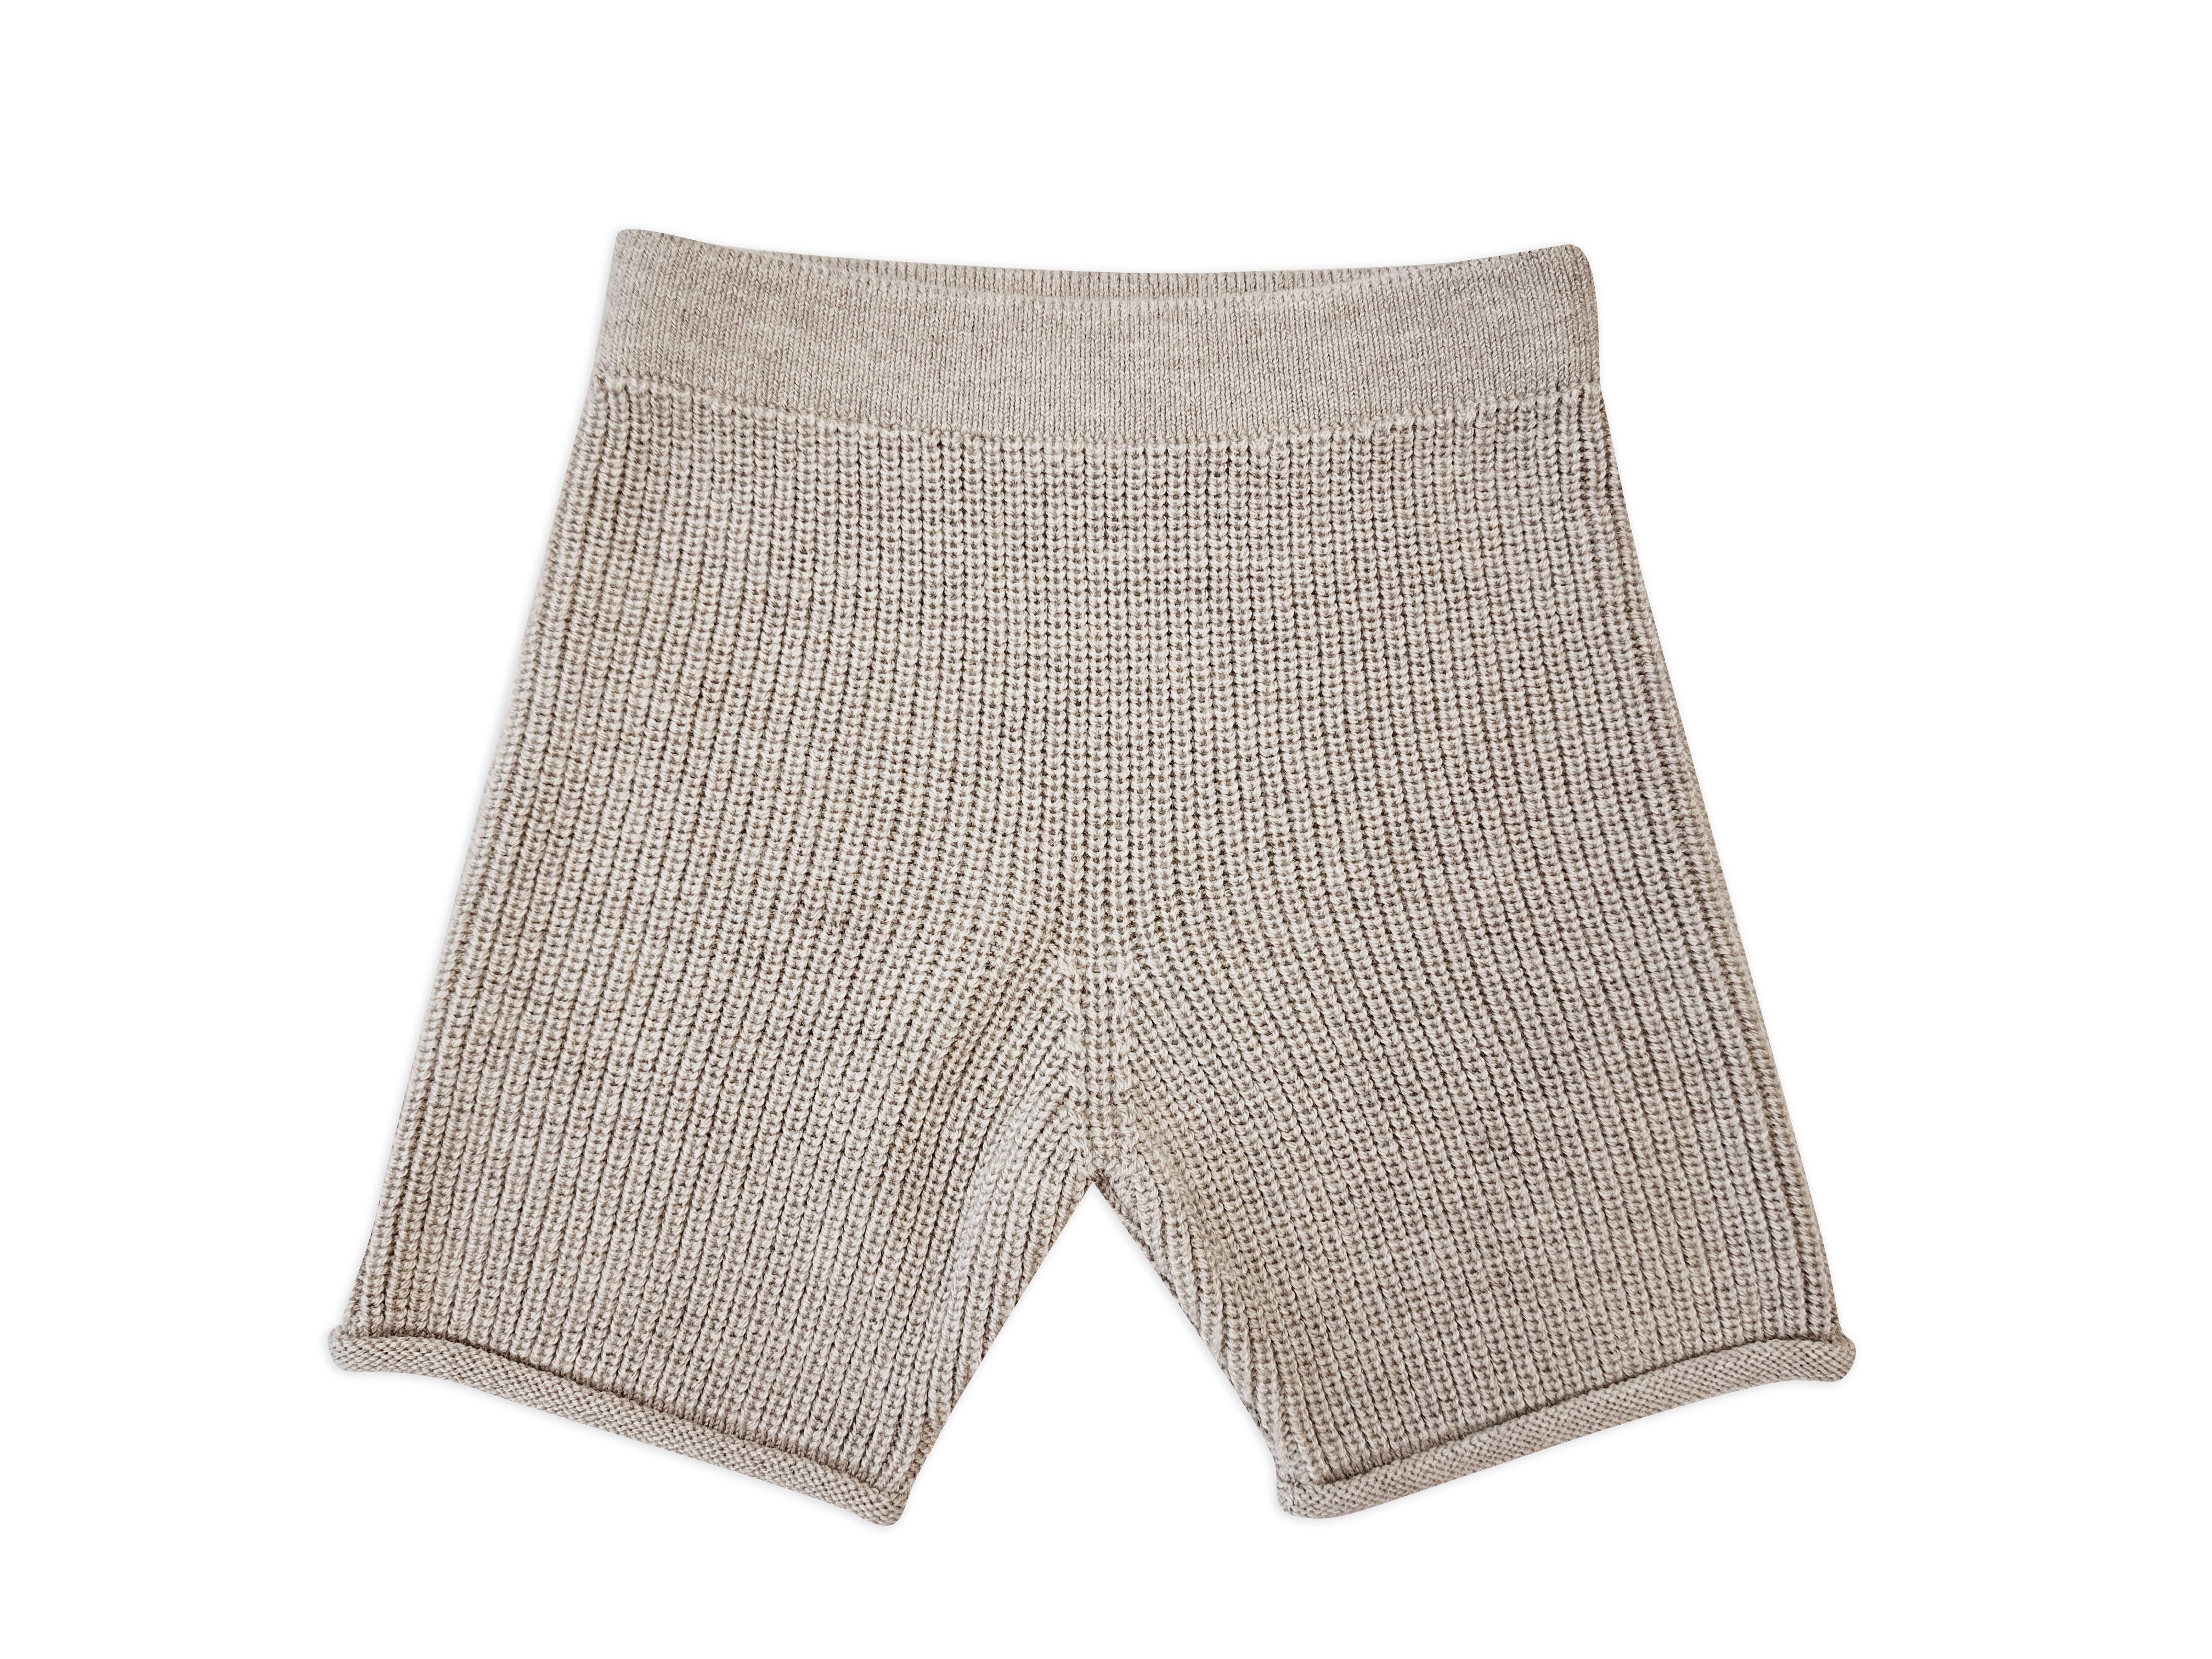 Shorts "Lucia" in newsand